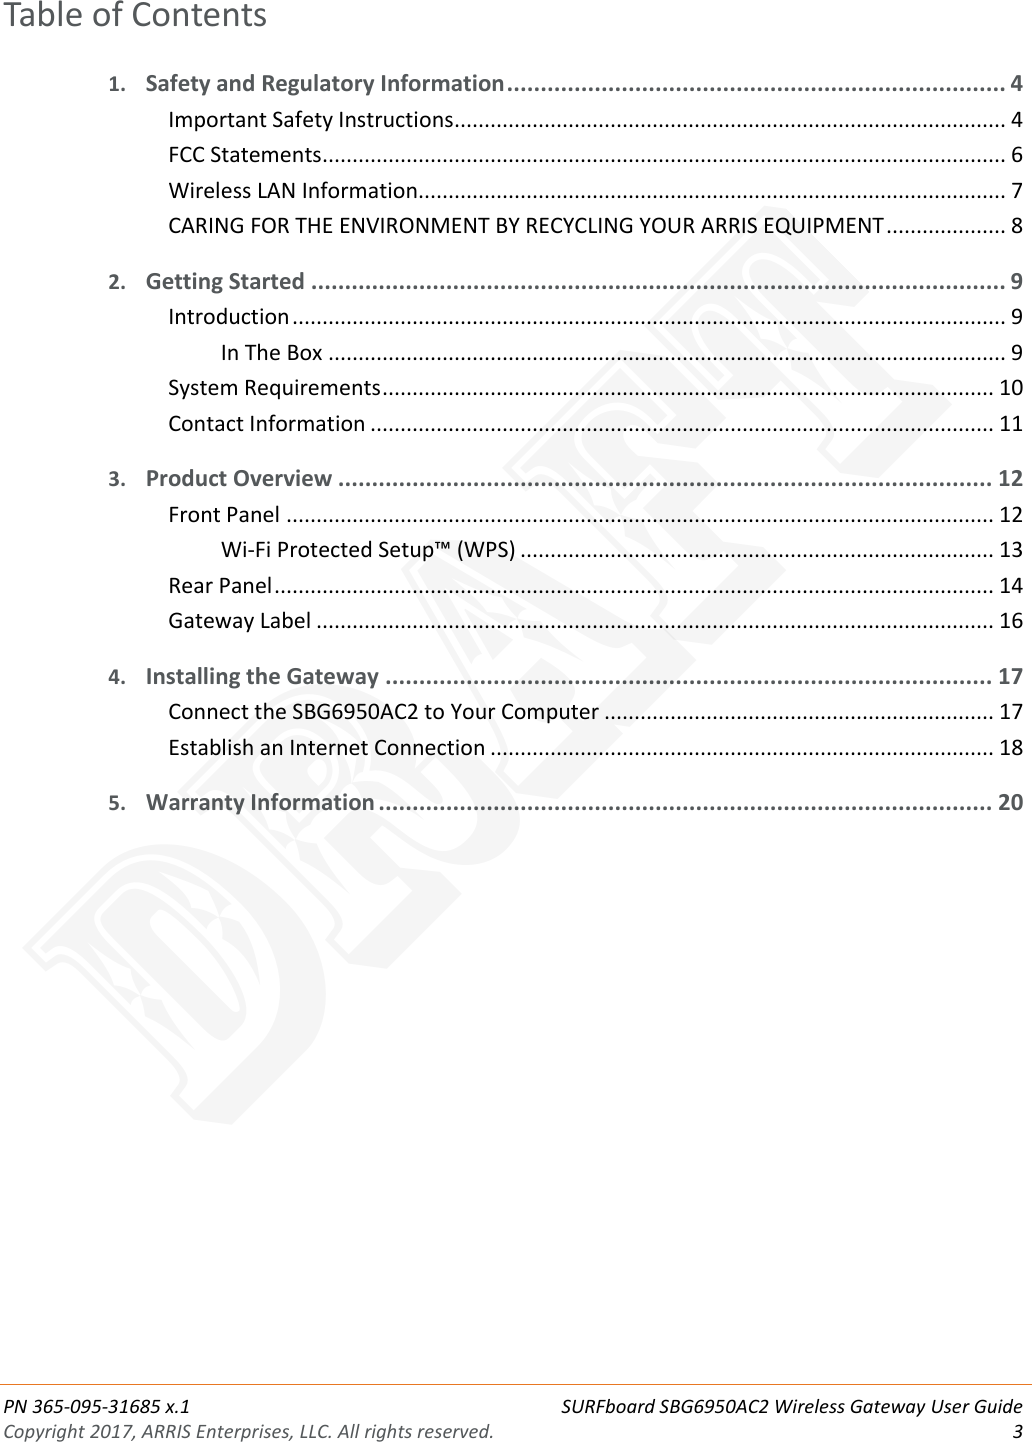  PN 365-095-31685 x.1 SURFboard SBG6950AC2 Wireless Gateway User Guide Copyright 2017, ARRIS Enterprises, LLC. All rights reserved.  3  Table of Contents 1. Safety and Regulatory Information .......................................................................... 4 Important Safety Instructions ............................................................................................ 4 FCC Statements .................................................................................................................. 6 Wireless LAN Information.................................................................................................. 7 CARING FOR THE ENVIRONMENT BY RECYCLING YOUR ARRIS EQUIPMENT .................... 8 2. Getting Started ....................................................................................................... 9 Introduction ....................................................................................................................... 9 In The Box ................................................................................................................. 9 System Requirements ...................................................................................................... 10 Contact Information ........................................................................................................ 11 3. Product Overview ................................................................................................. 12 Front Panel ...................................................................................................................... 12 Wi-Fi Protected Setup™ (WPS) ............................................................................... 13 Rear Panel ........................................................................................................................ 14 Gateway Label ................................................................................................................. 16 4. Installing the Gateway .......................................................................................... 17 Connect the SBG6950AC2 to Your Computer ................................................................. 17 Establish an Internet Connection .................................................................................... 18 5. Warranty Information ........................................................................................... 20   DRAFT